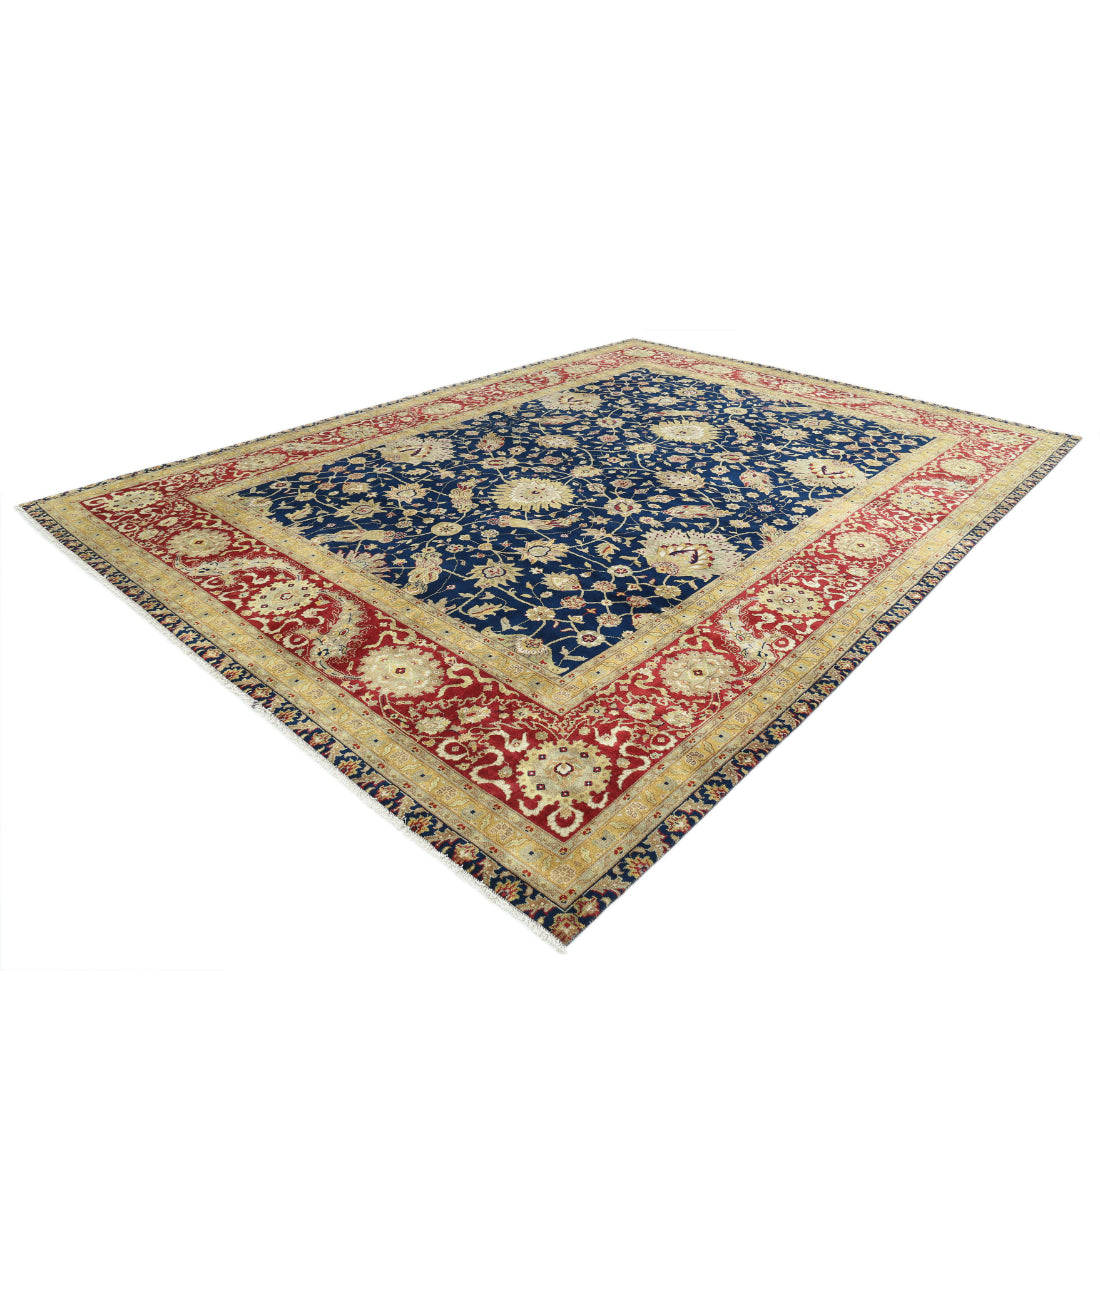 Ziegler 9'11'' X 13'10'' Hand-Knotted Wool Rug 9'11'' x 13'10'' (298 X 415) / Blue / Red